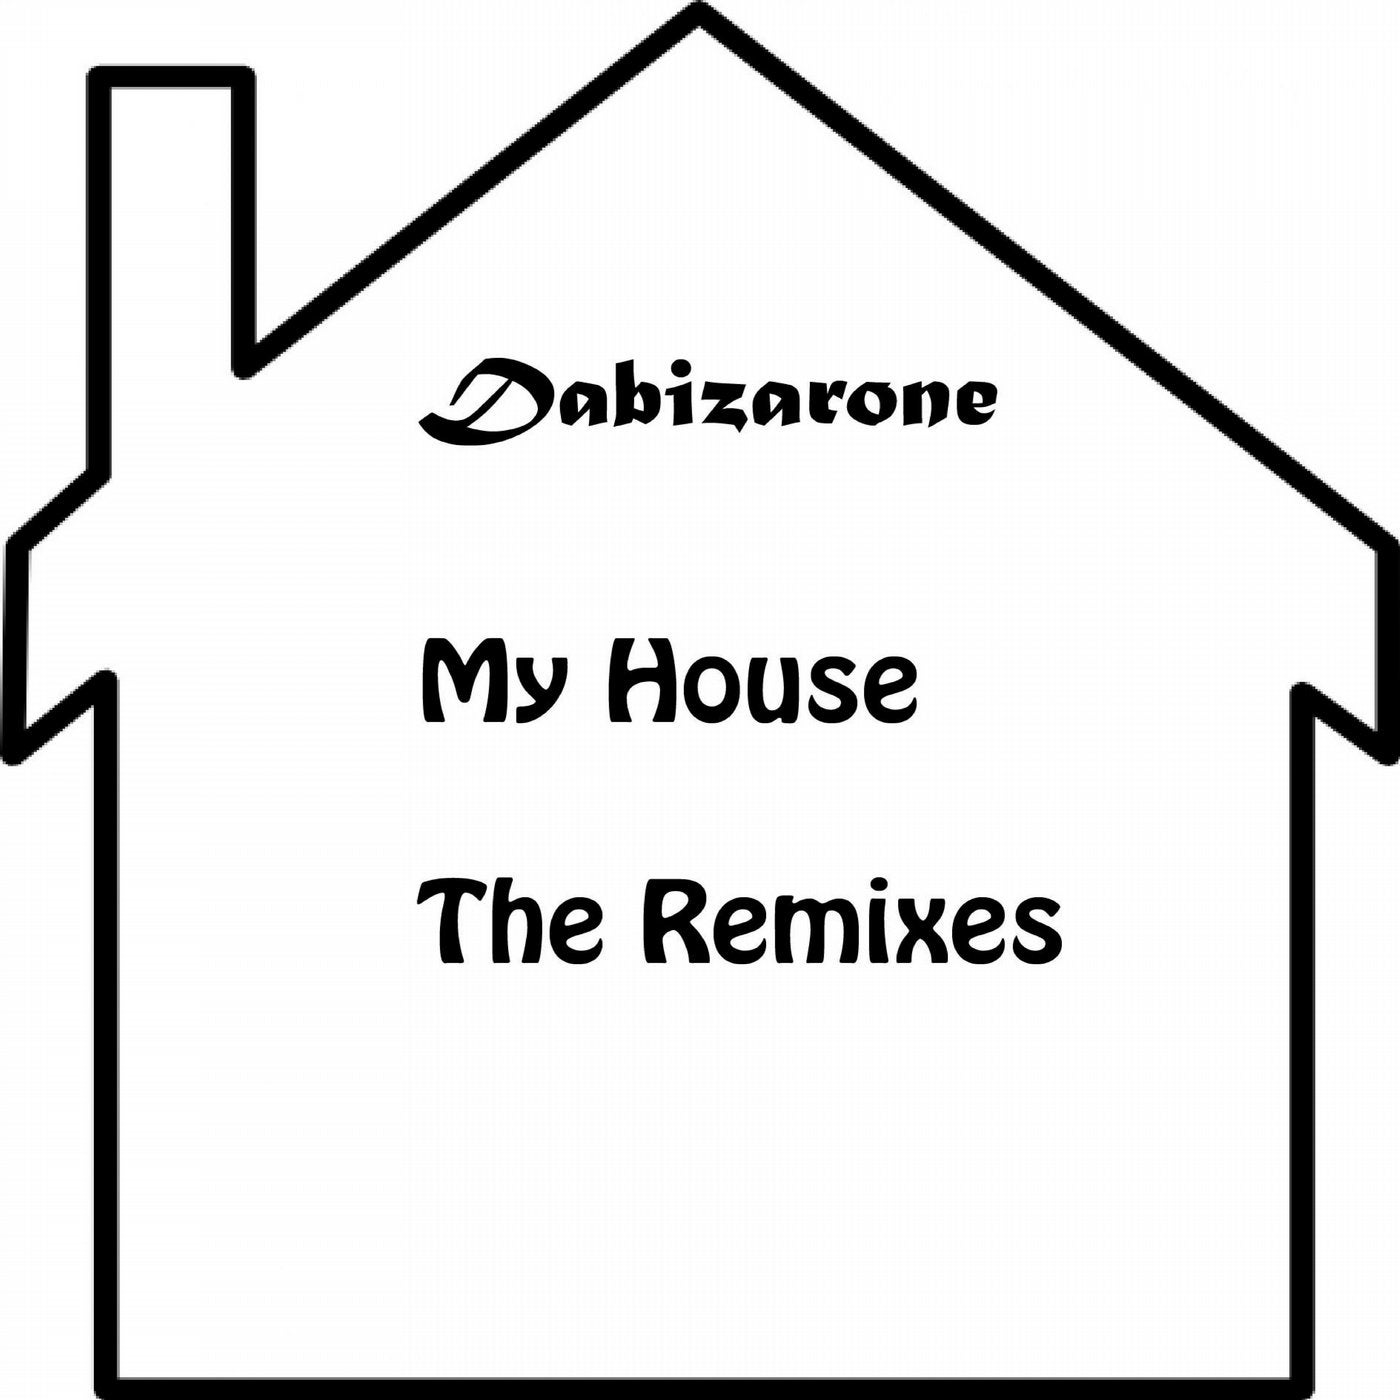 My House - The Remixes